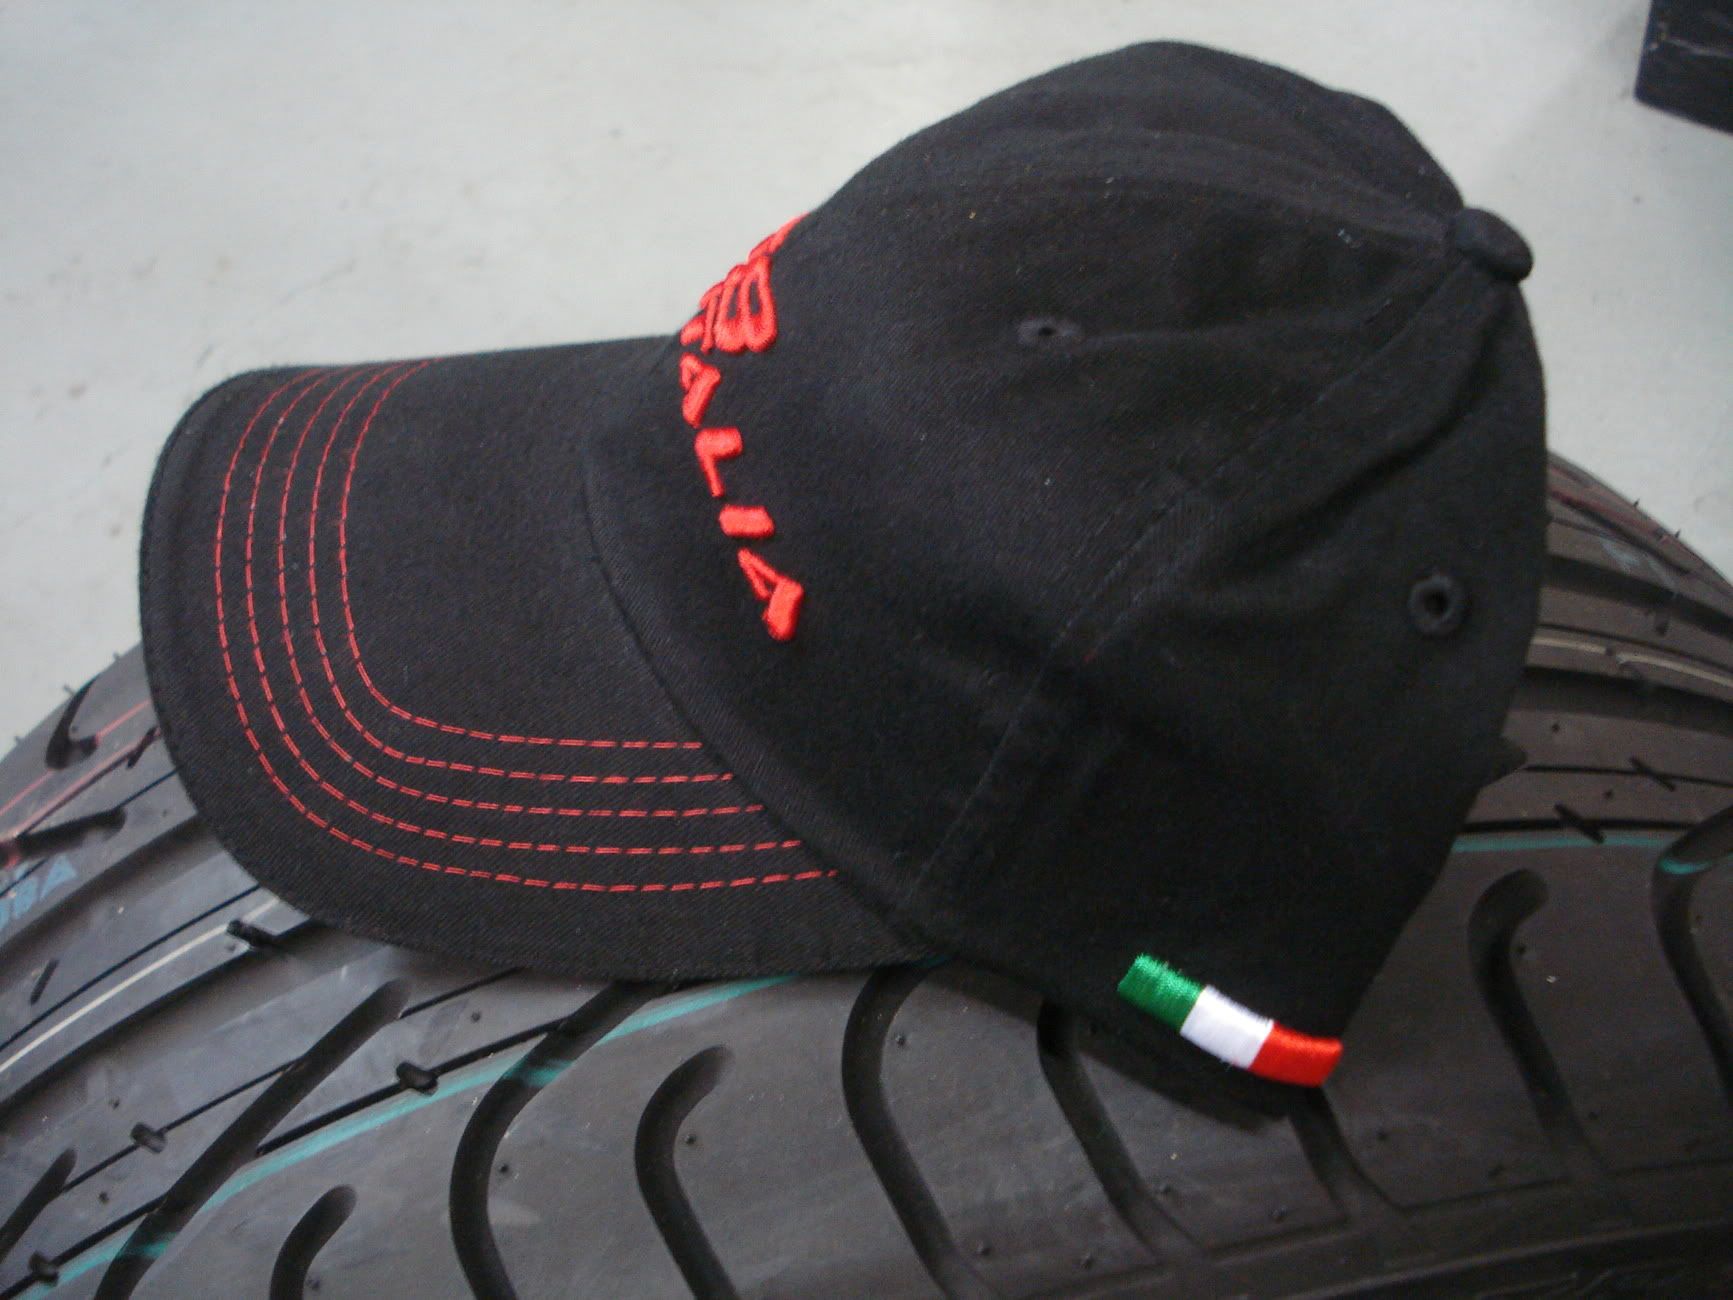  this is an offical 458 italia black cap